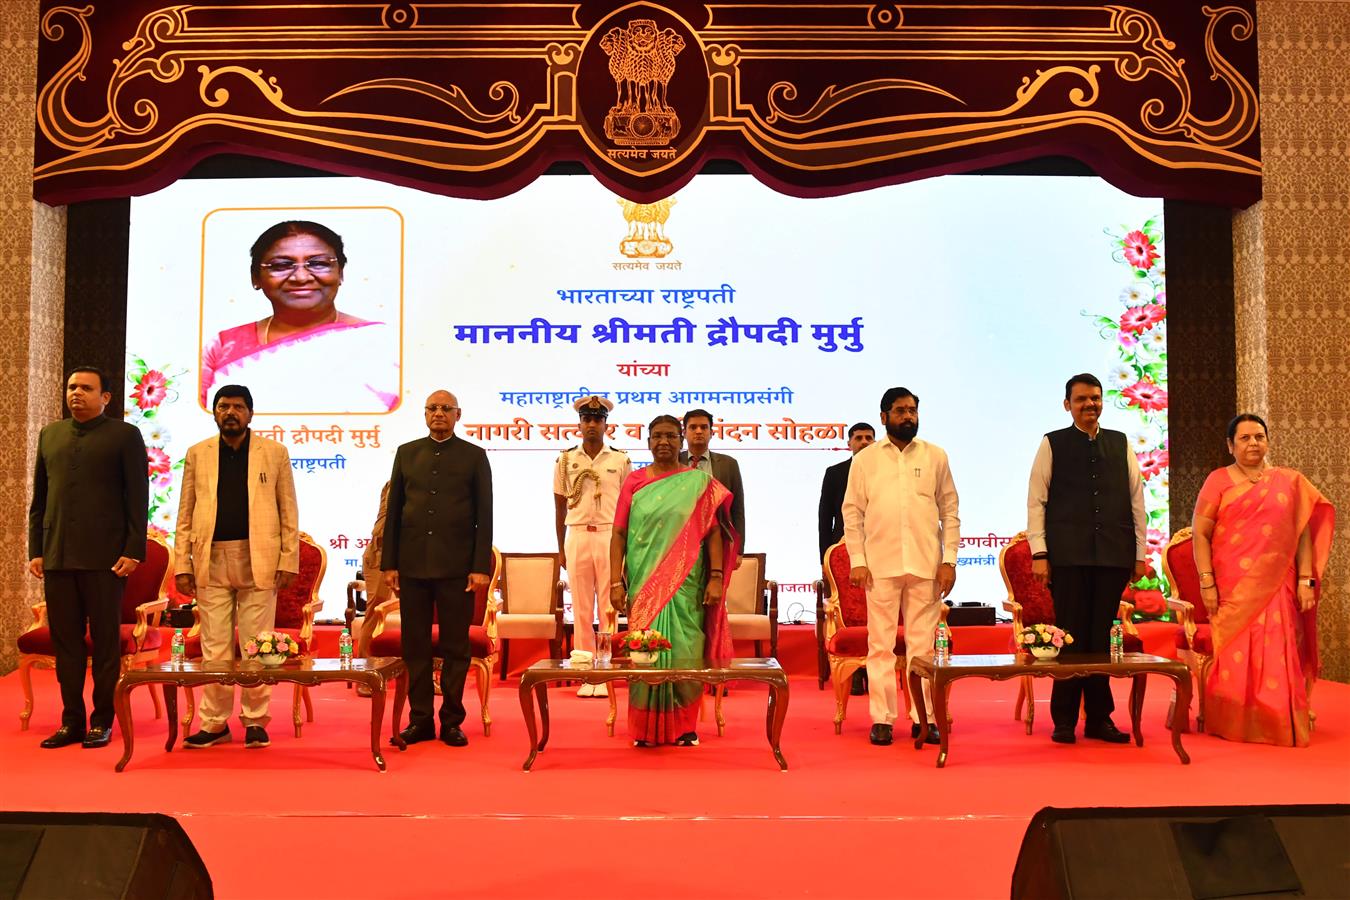 The President of India, Smt Droupadi Murmu attended a civic reception hosted in her honour by the Government of Maharashtra at Raj Bhavan, Mumbai on July 6, 2023.